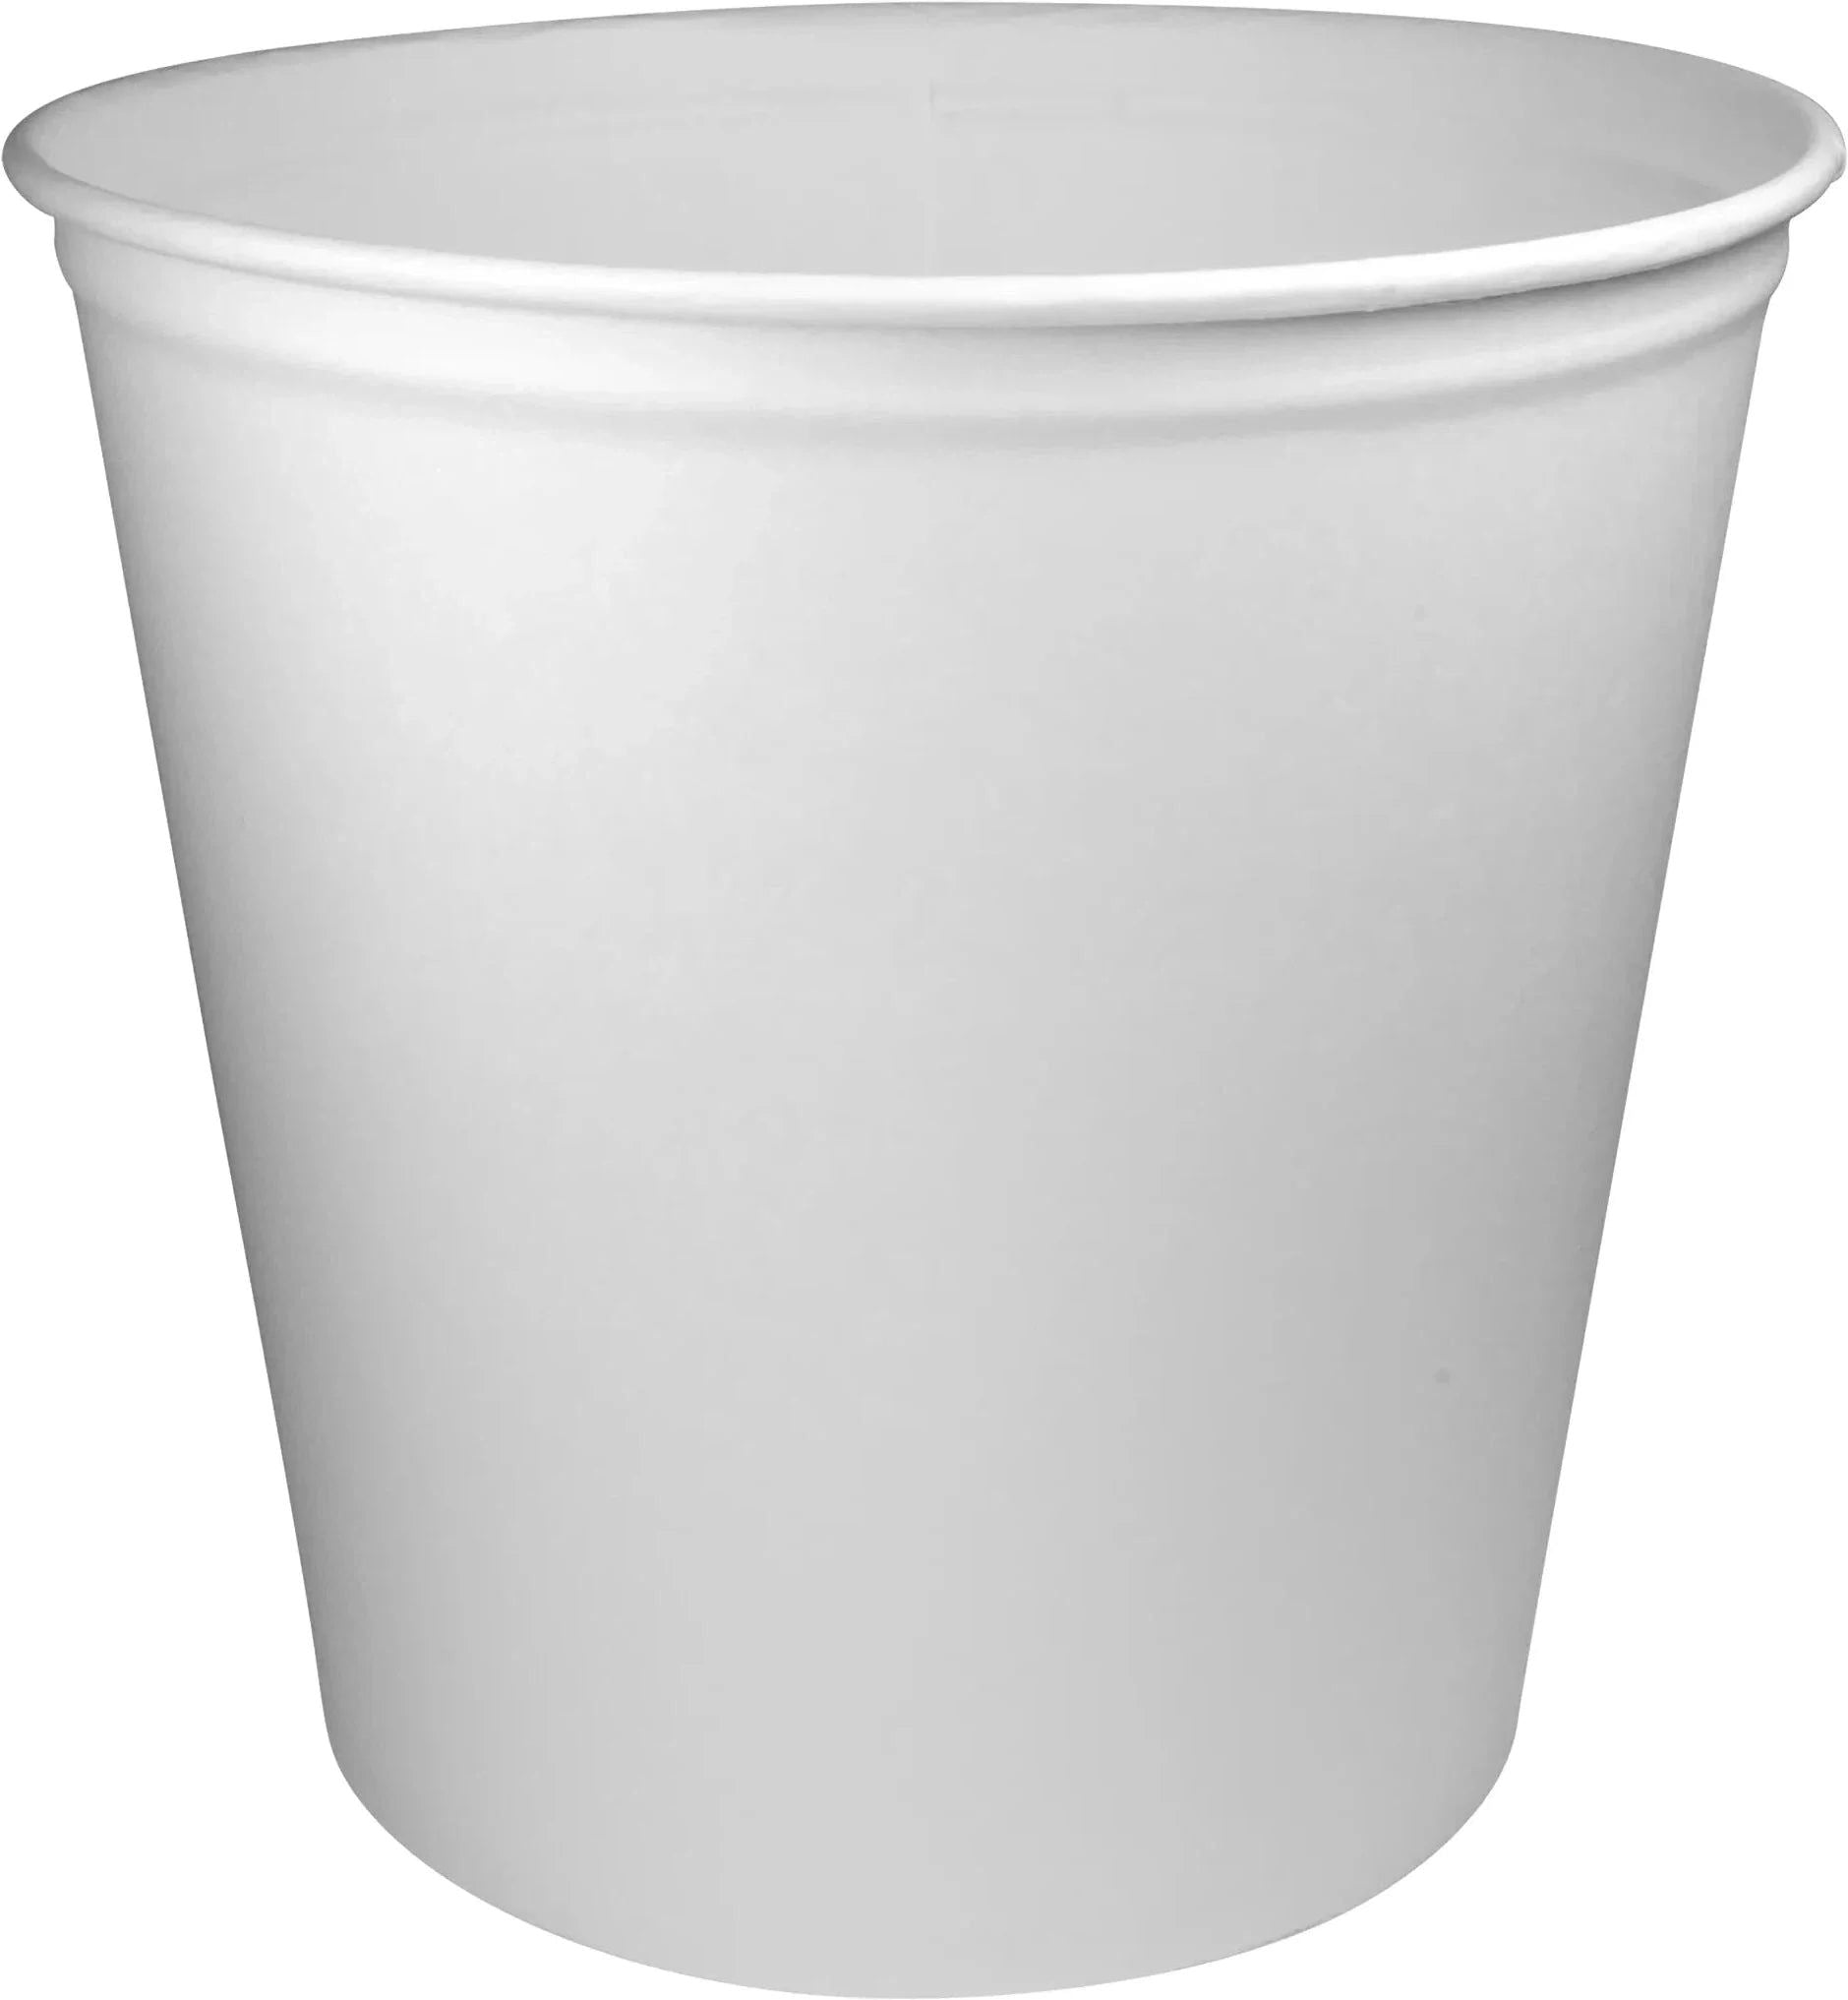 Dart Container - 165 Oz White Non-Coated Paper Tub/Bucket - 10T1-N0198